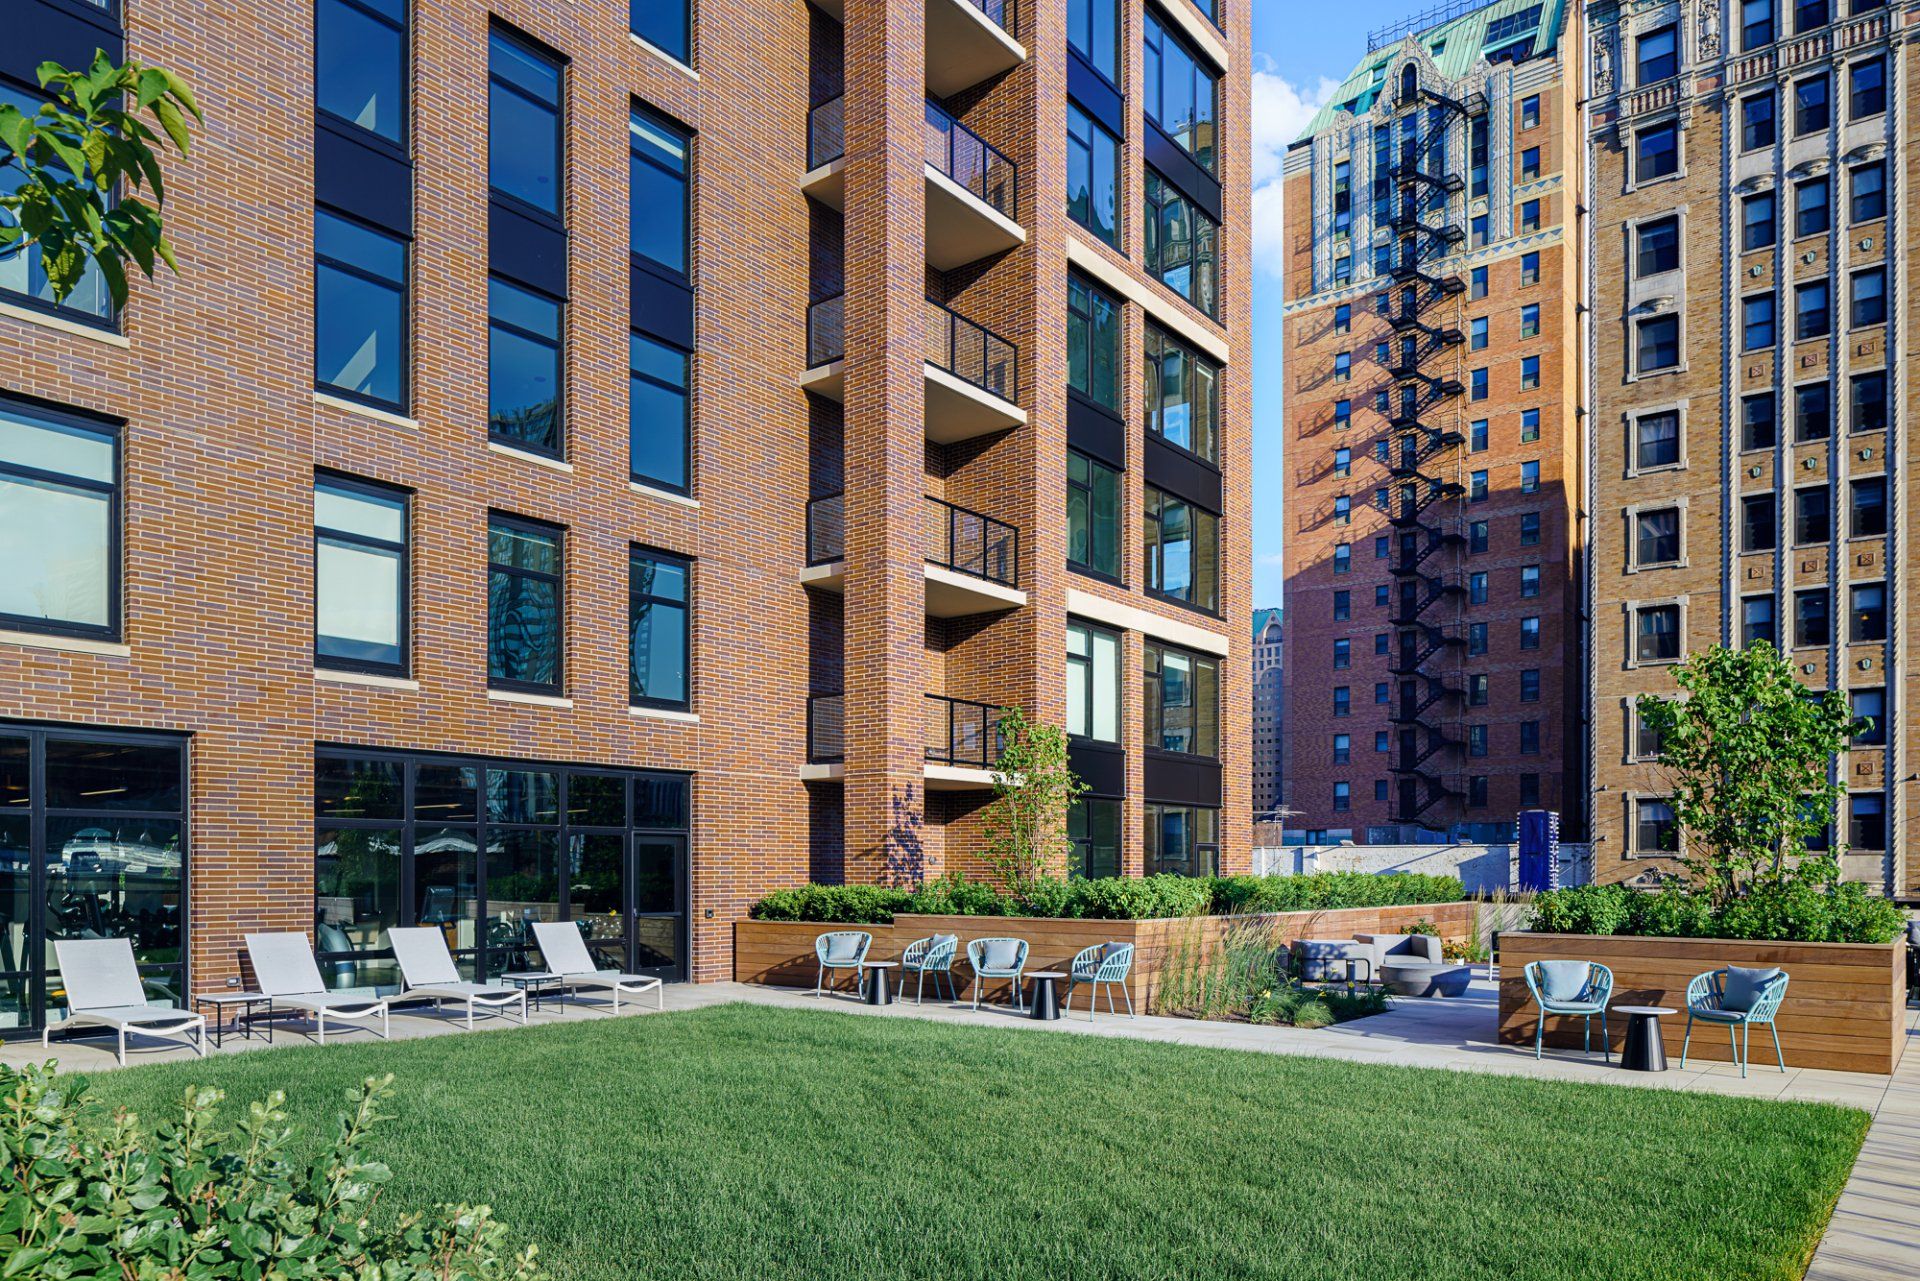 An exterior view of the apartment building at Gild Apartment with green space and seating areas.